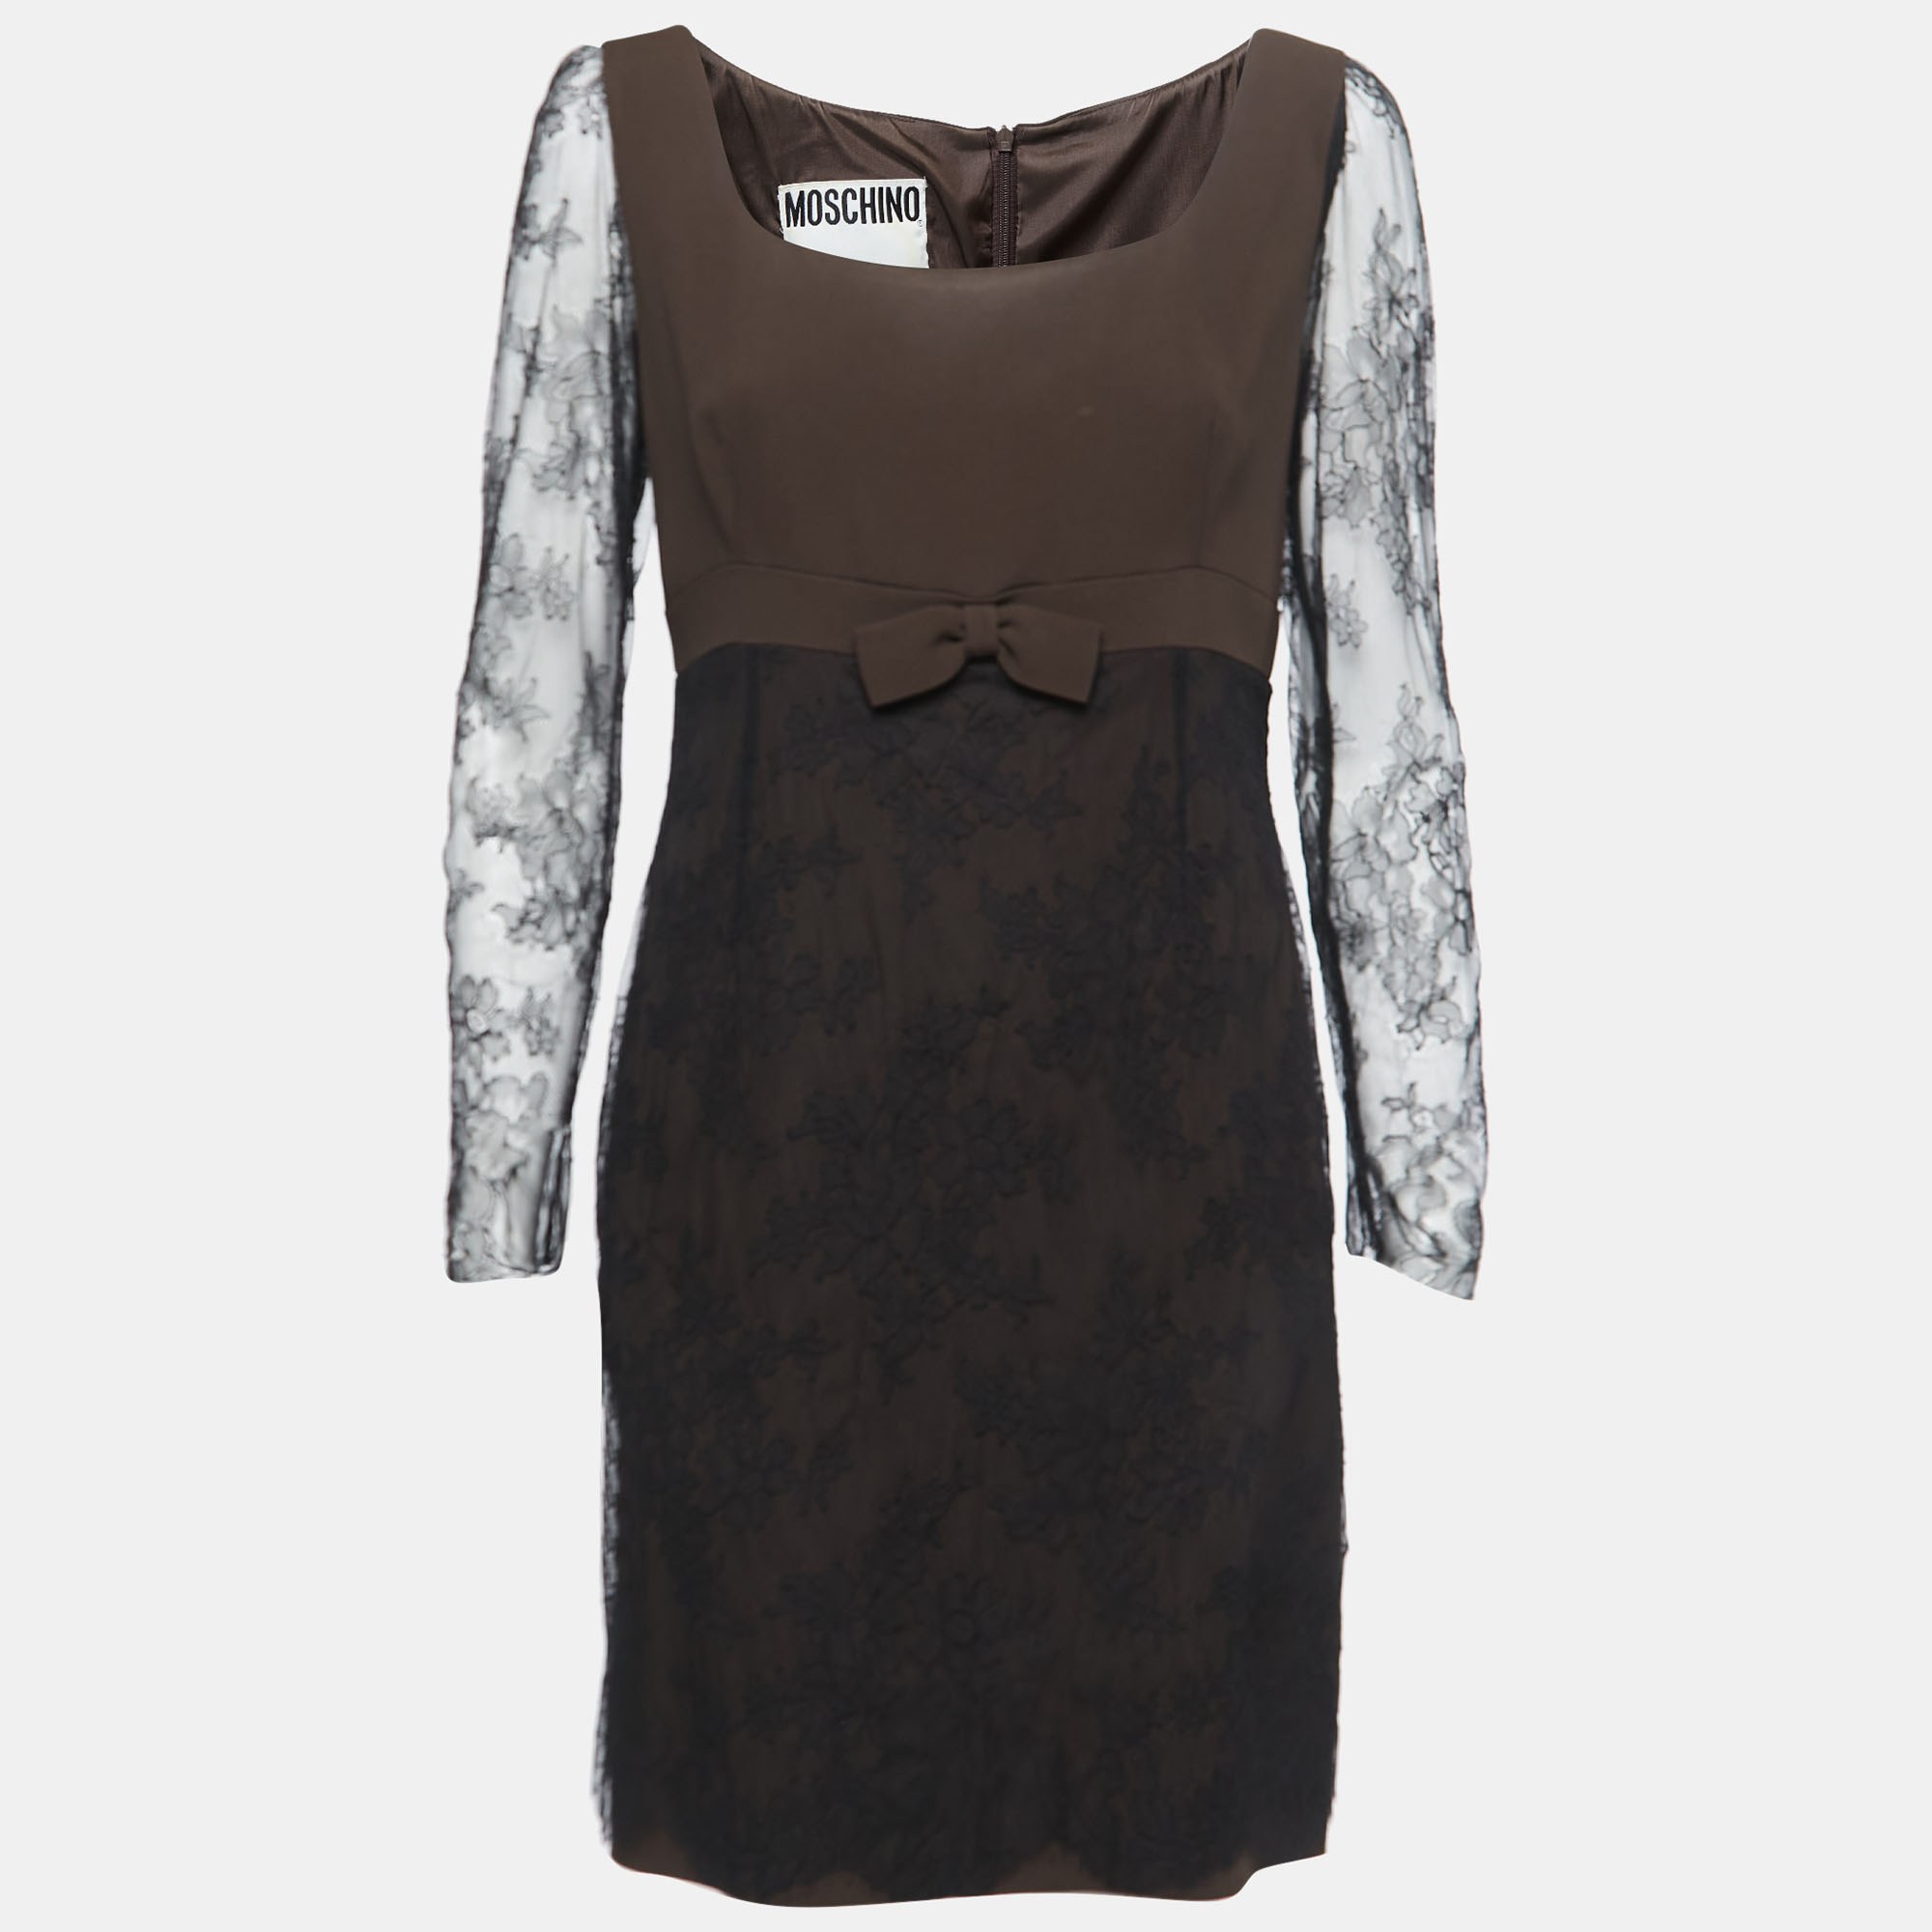 

Moschino Couture Black/Brown Crepe & Lace Bow Detail Mini Dress